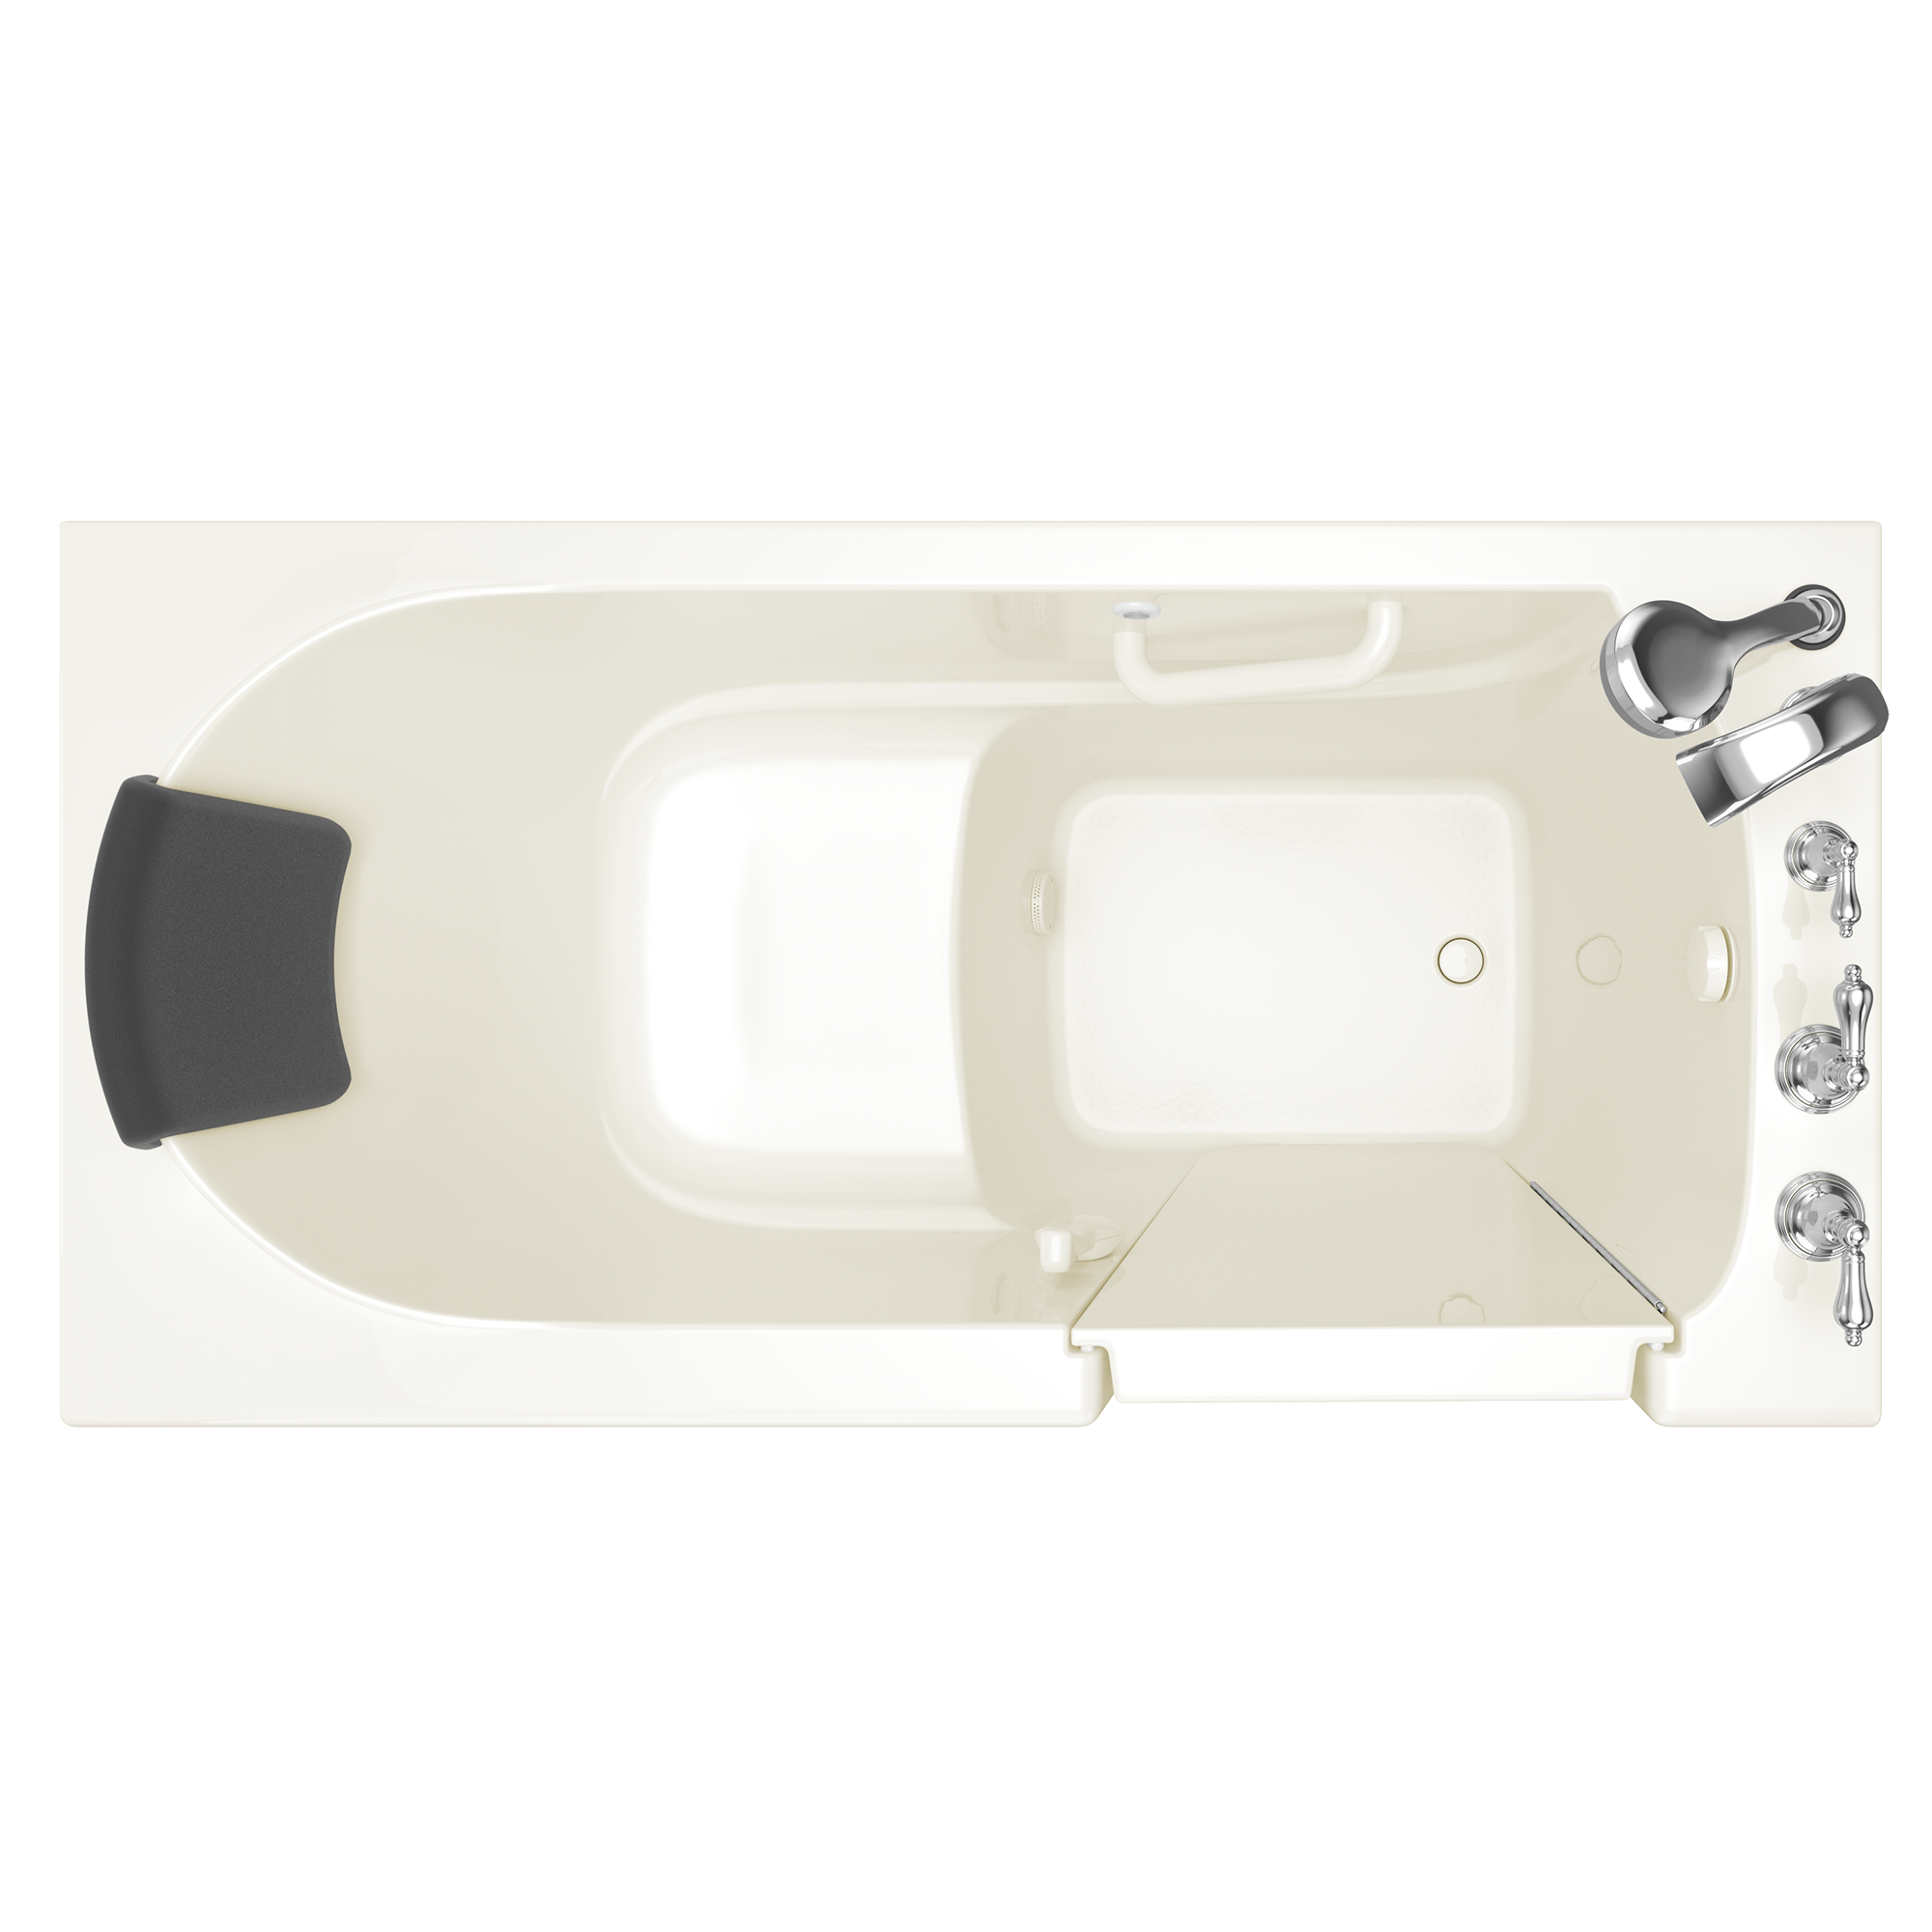 Gelcoat Premium Series 30 x 60 -Inch Walk-in Tub With Soaker System - Right-Hand Drain With Faucet